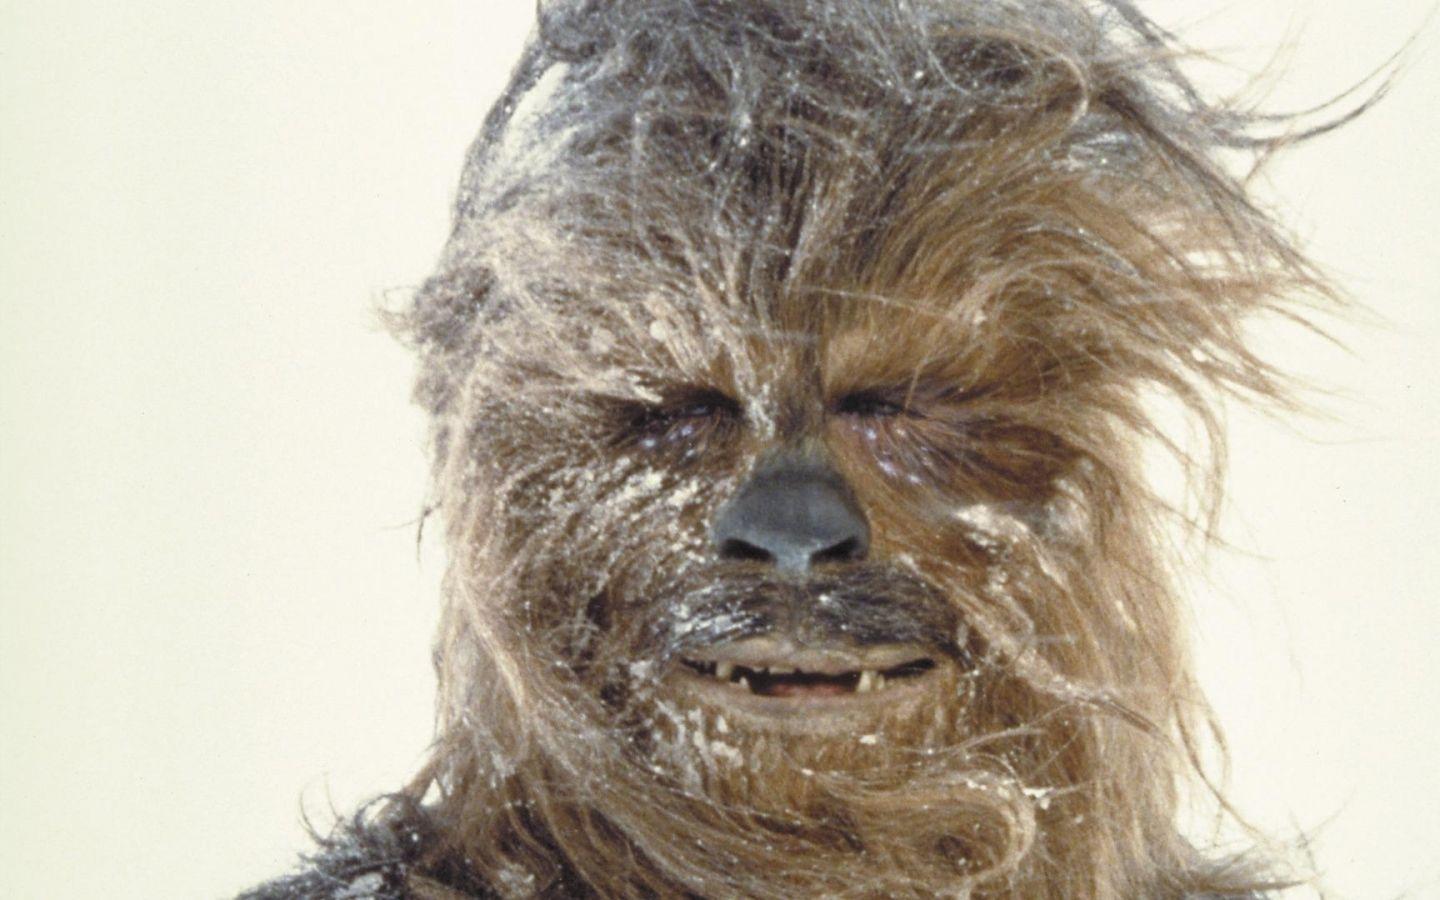 Fonds d&Chewbacca : tous les wallpapers Chewbacca